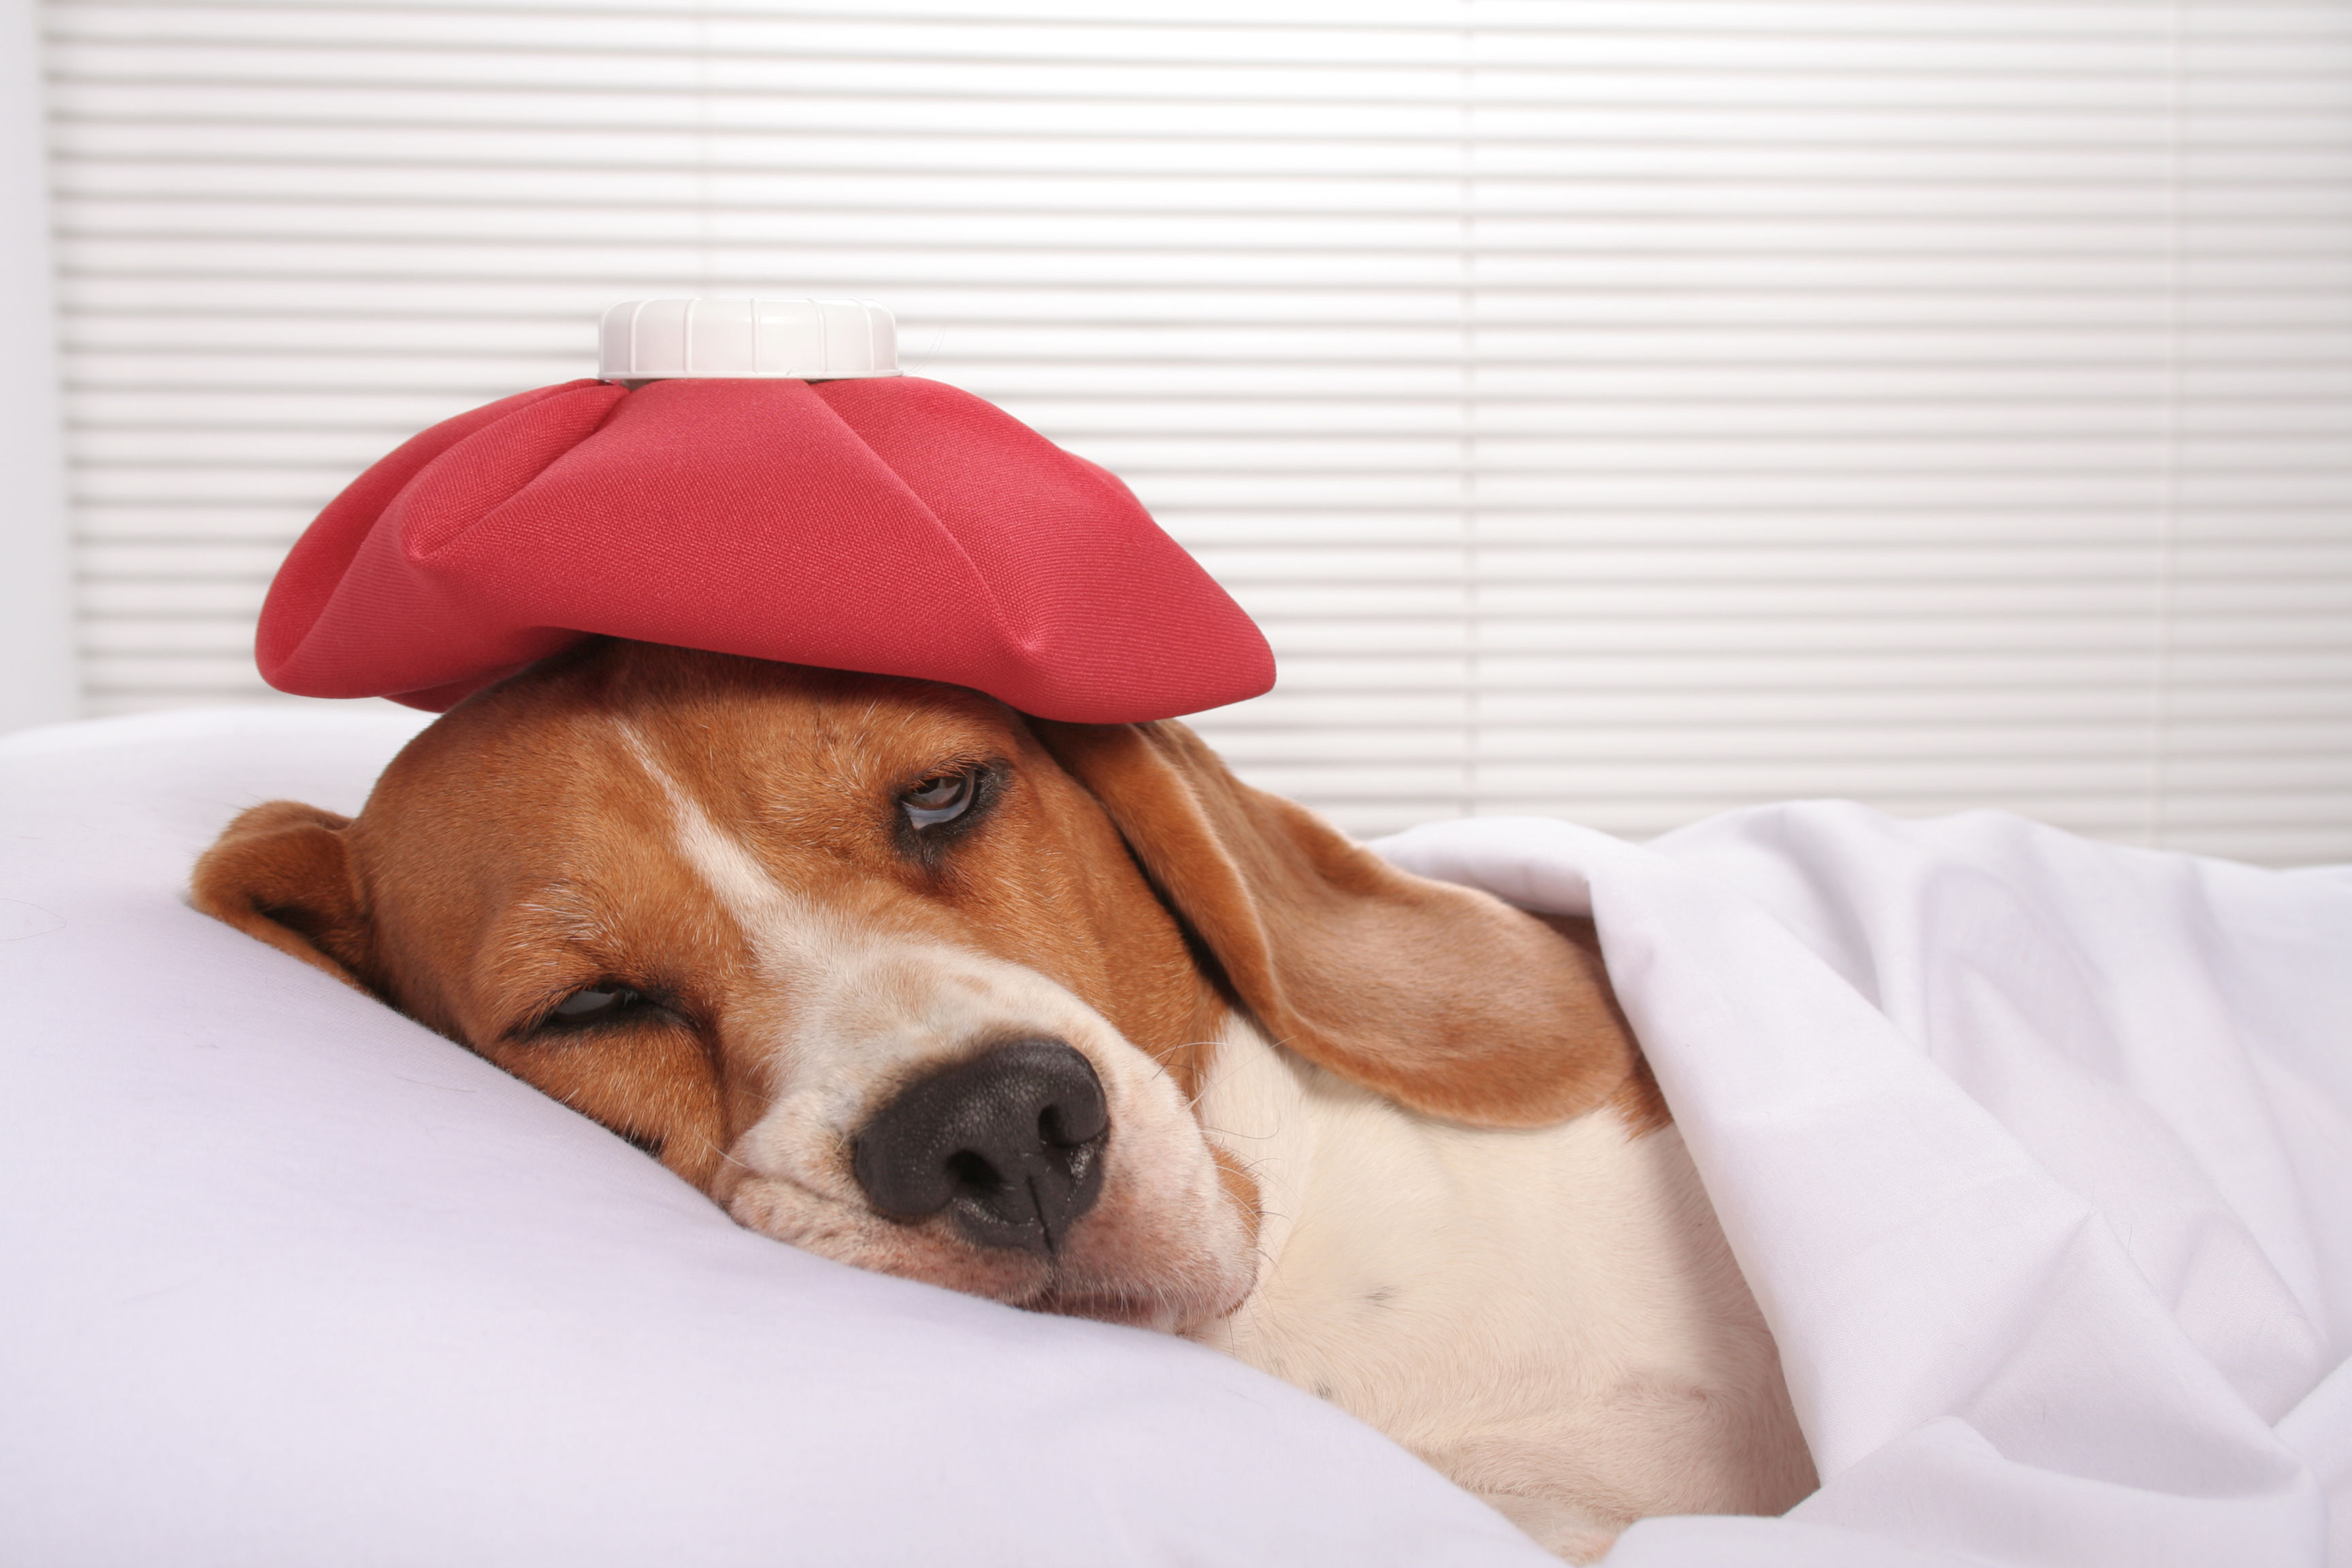 Beagle dog with a headache resting in bed with an ice pack on his head